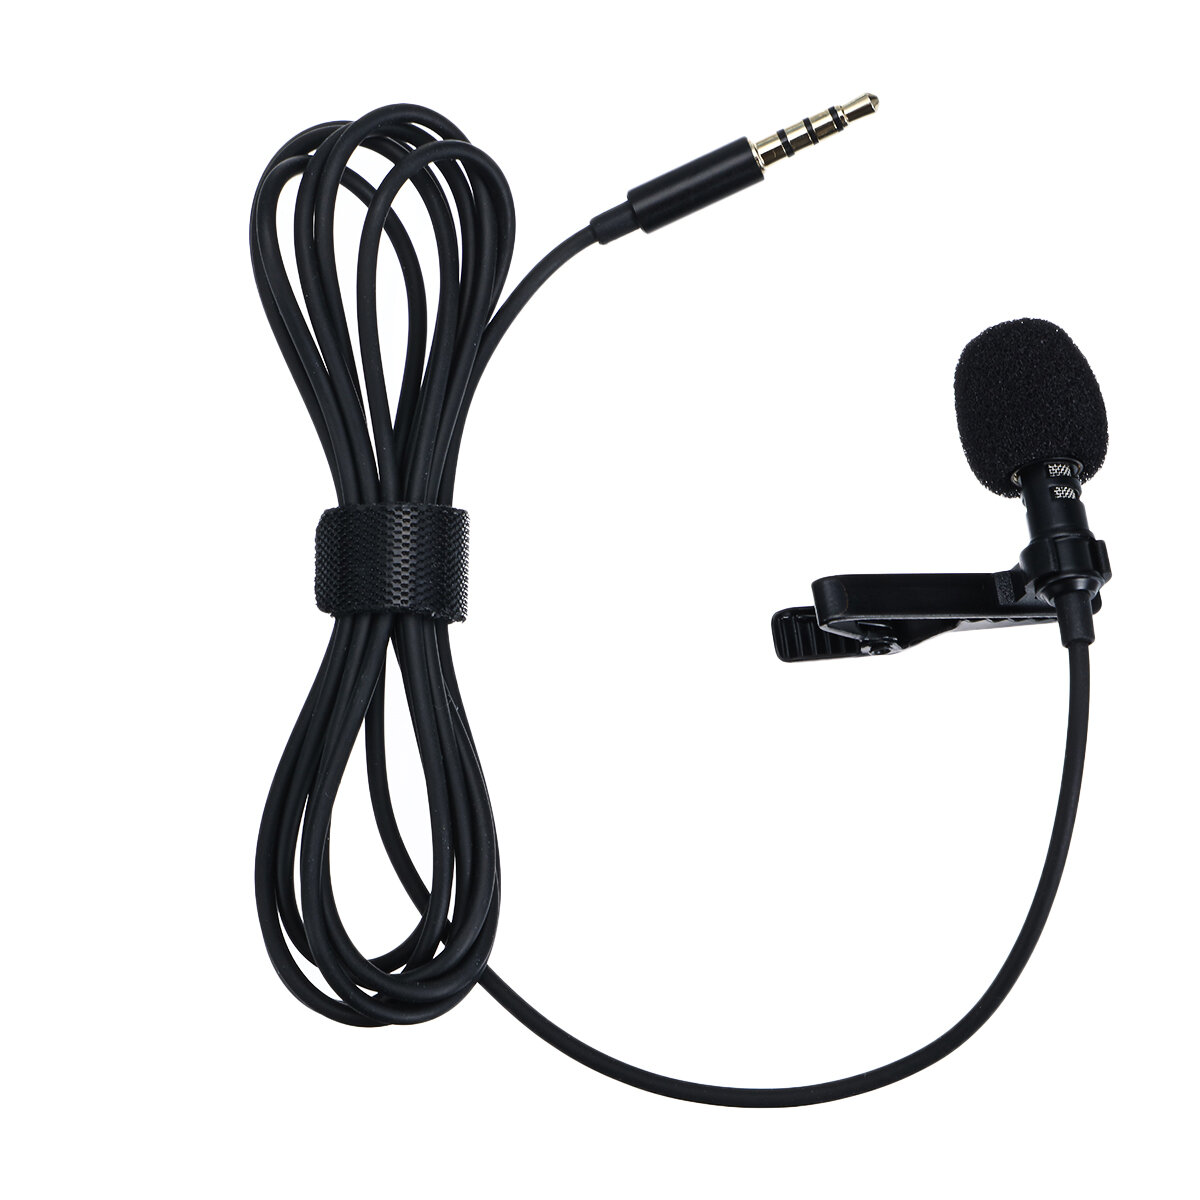 

EIVOTOR Dual Professional Lavalier Lapel Microphone for iPhone Android Smartphone PC DSLR Recording Mic for Interview Vi